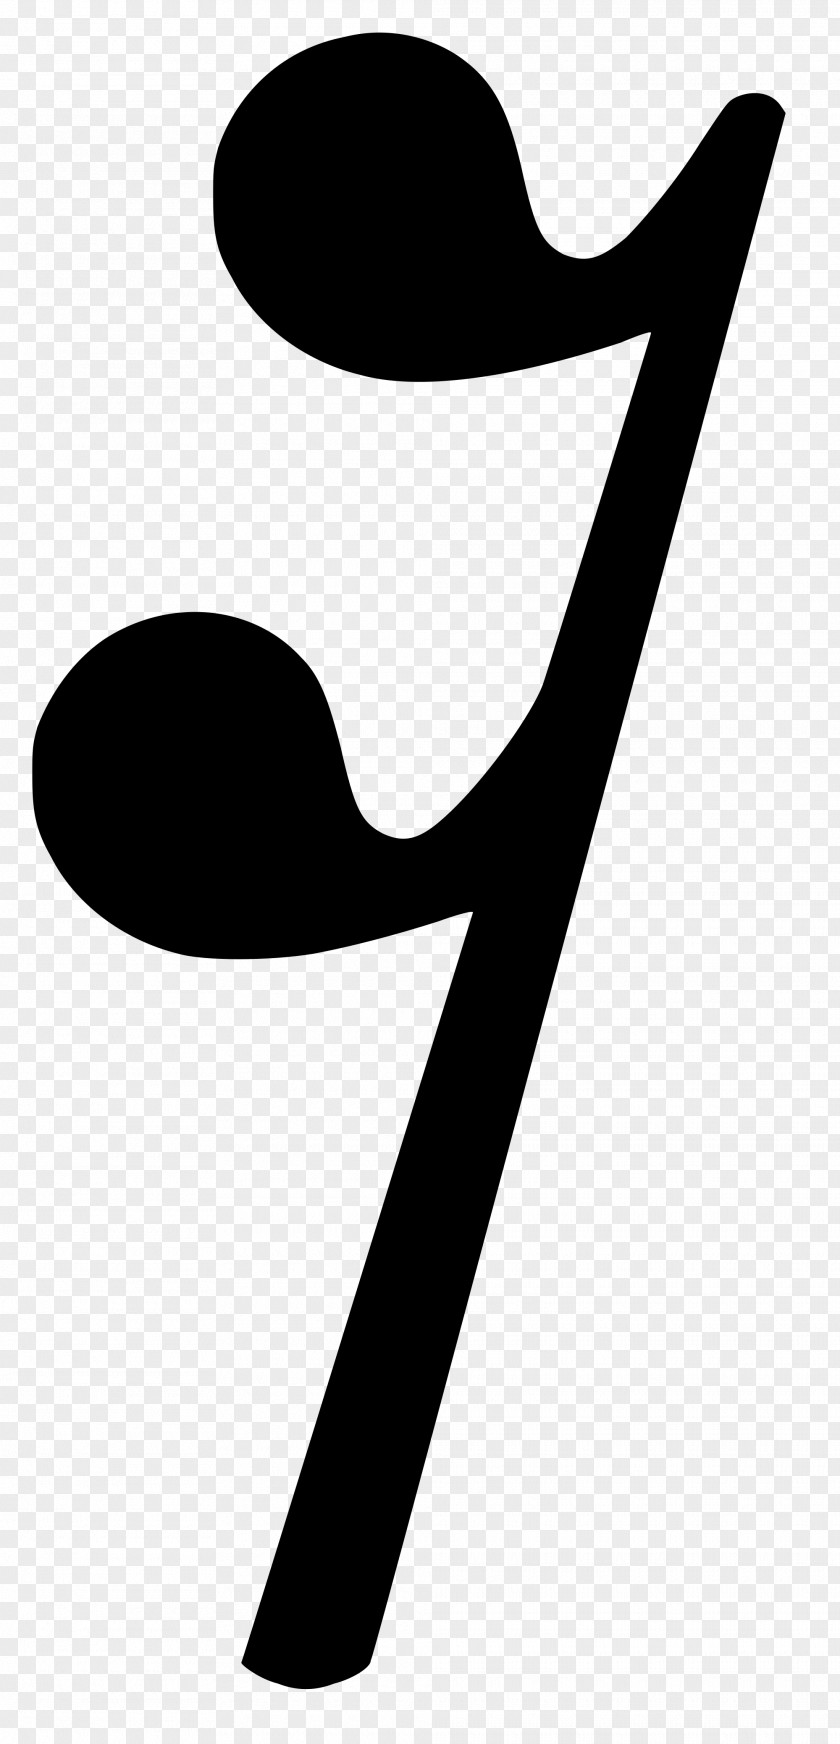 Musical Note Sixteenth Rest Eighth Quarter PNG